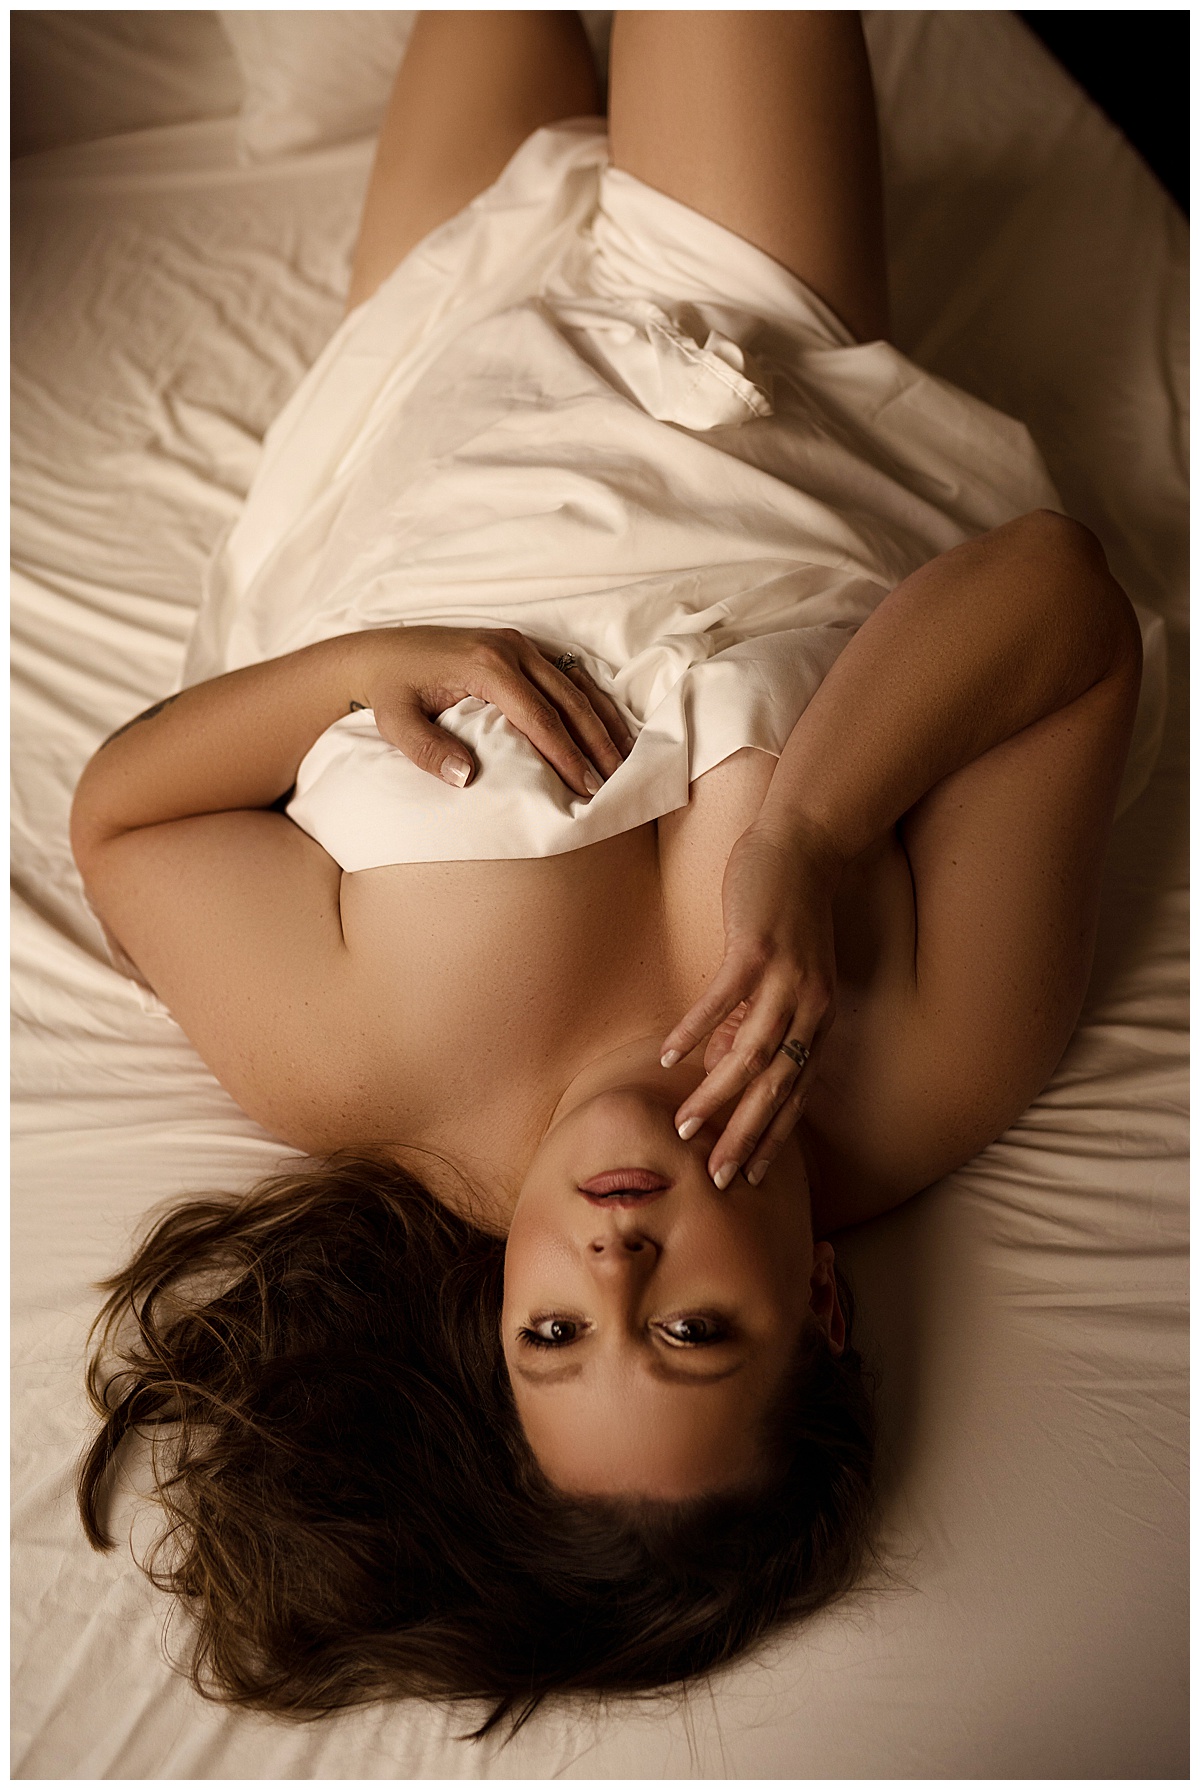 Girl lays on the bed wrapped in a white sheet as a way to boost your self-confidence